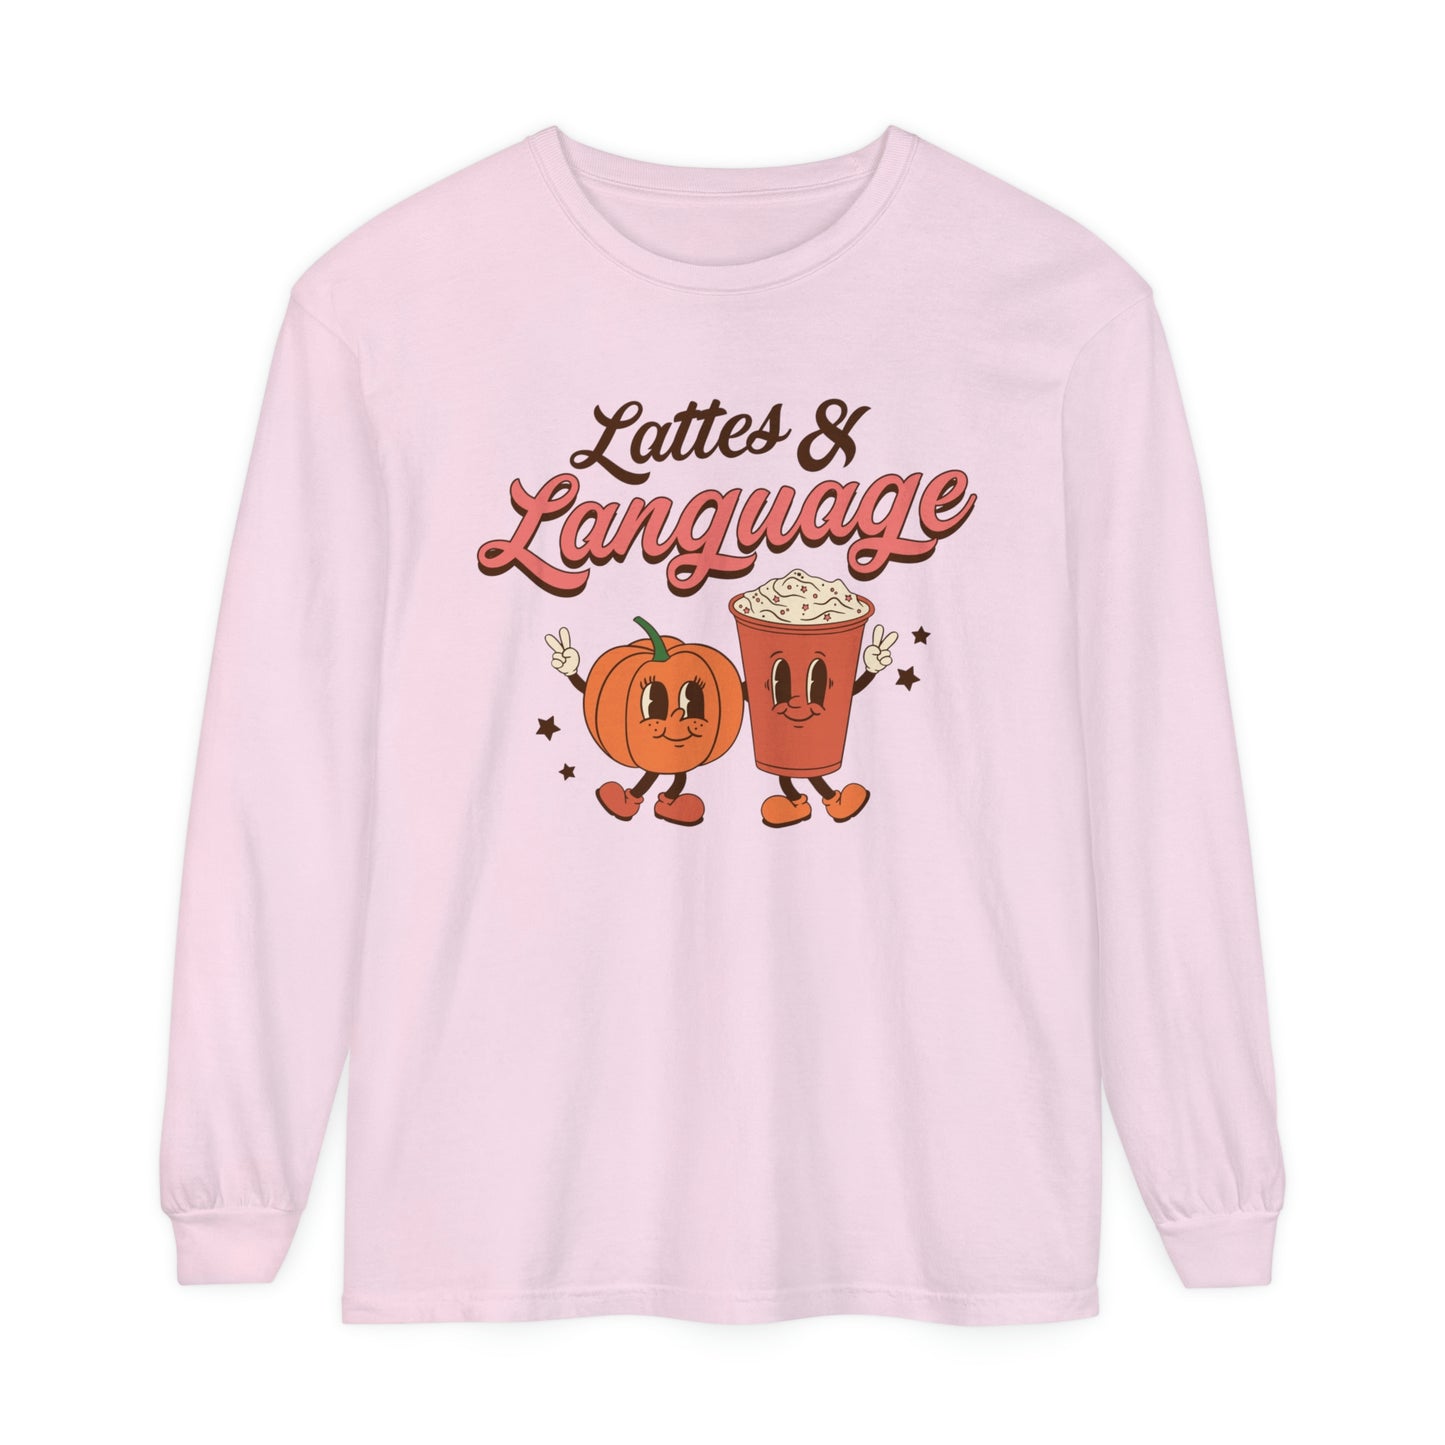 Lattes and Language Long Sleeve Comfort Colors T-Shirt